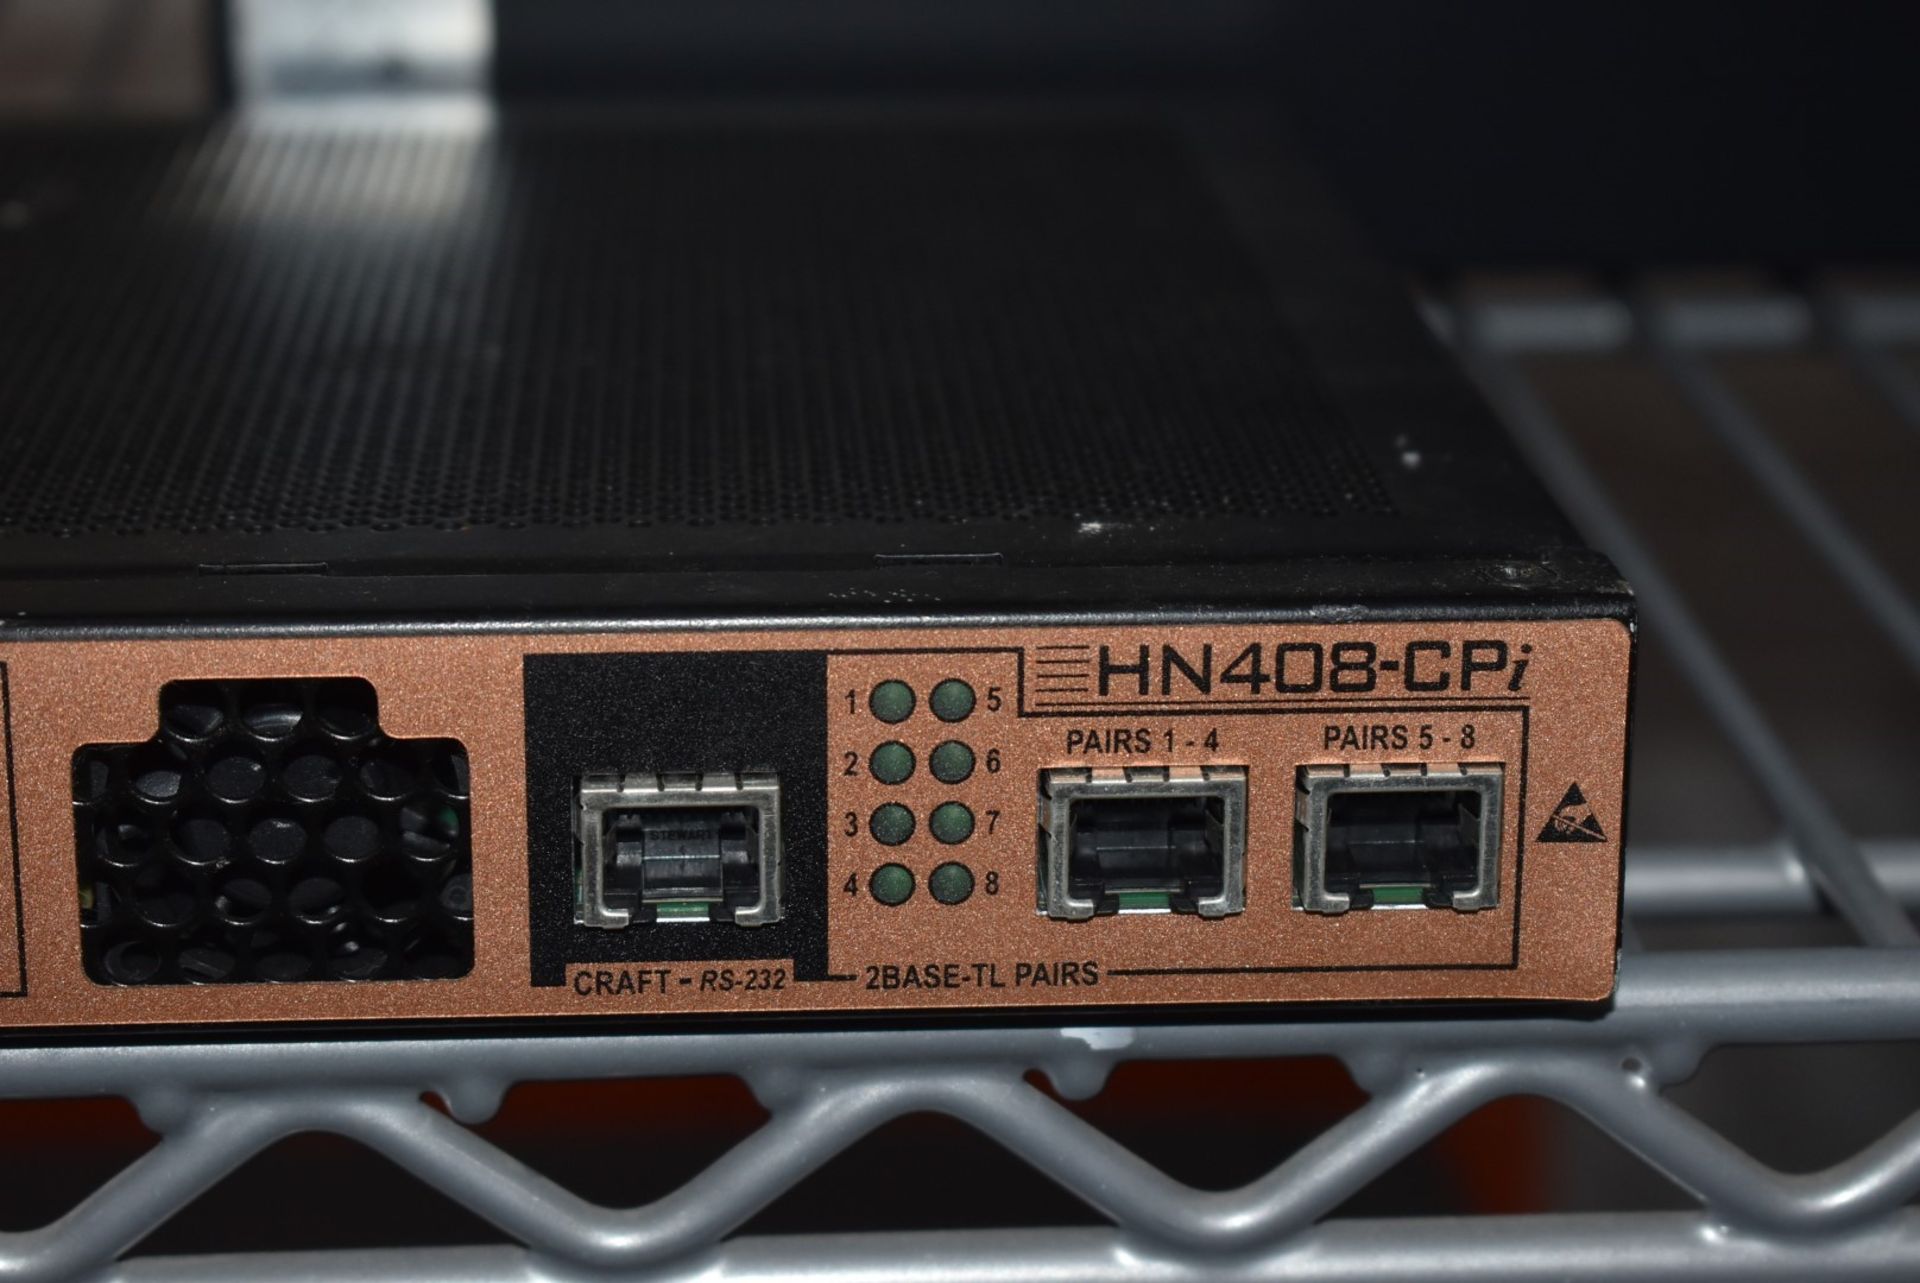 1 x Hatteras Networks HN408-CPi Ethernet Modem - Ref: MPC697 WH3 - CL011 - Location: Altrincham - Image 4 of 5